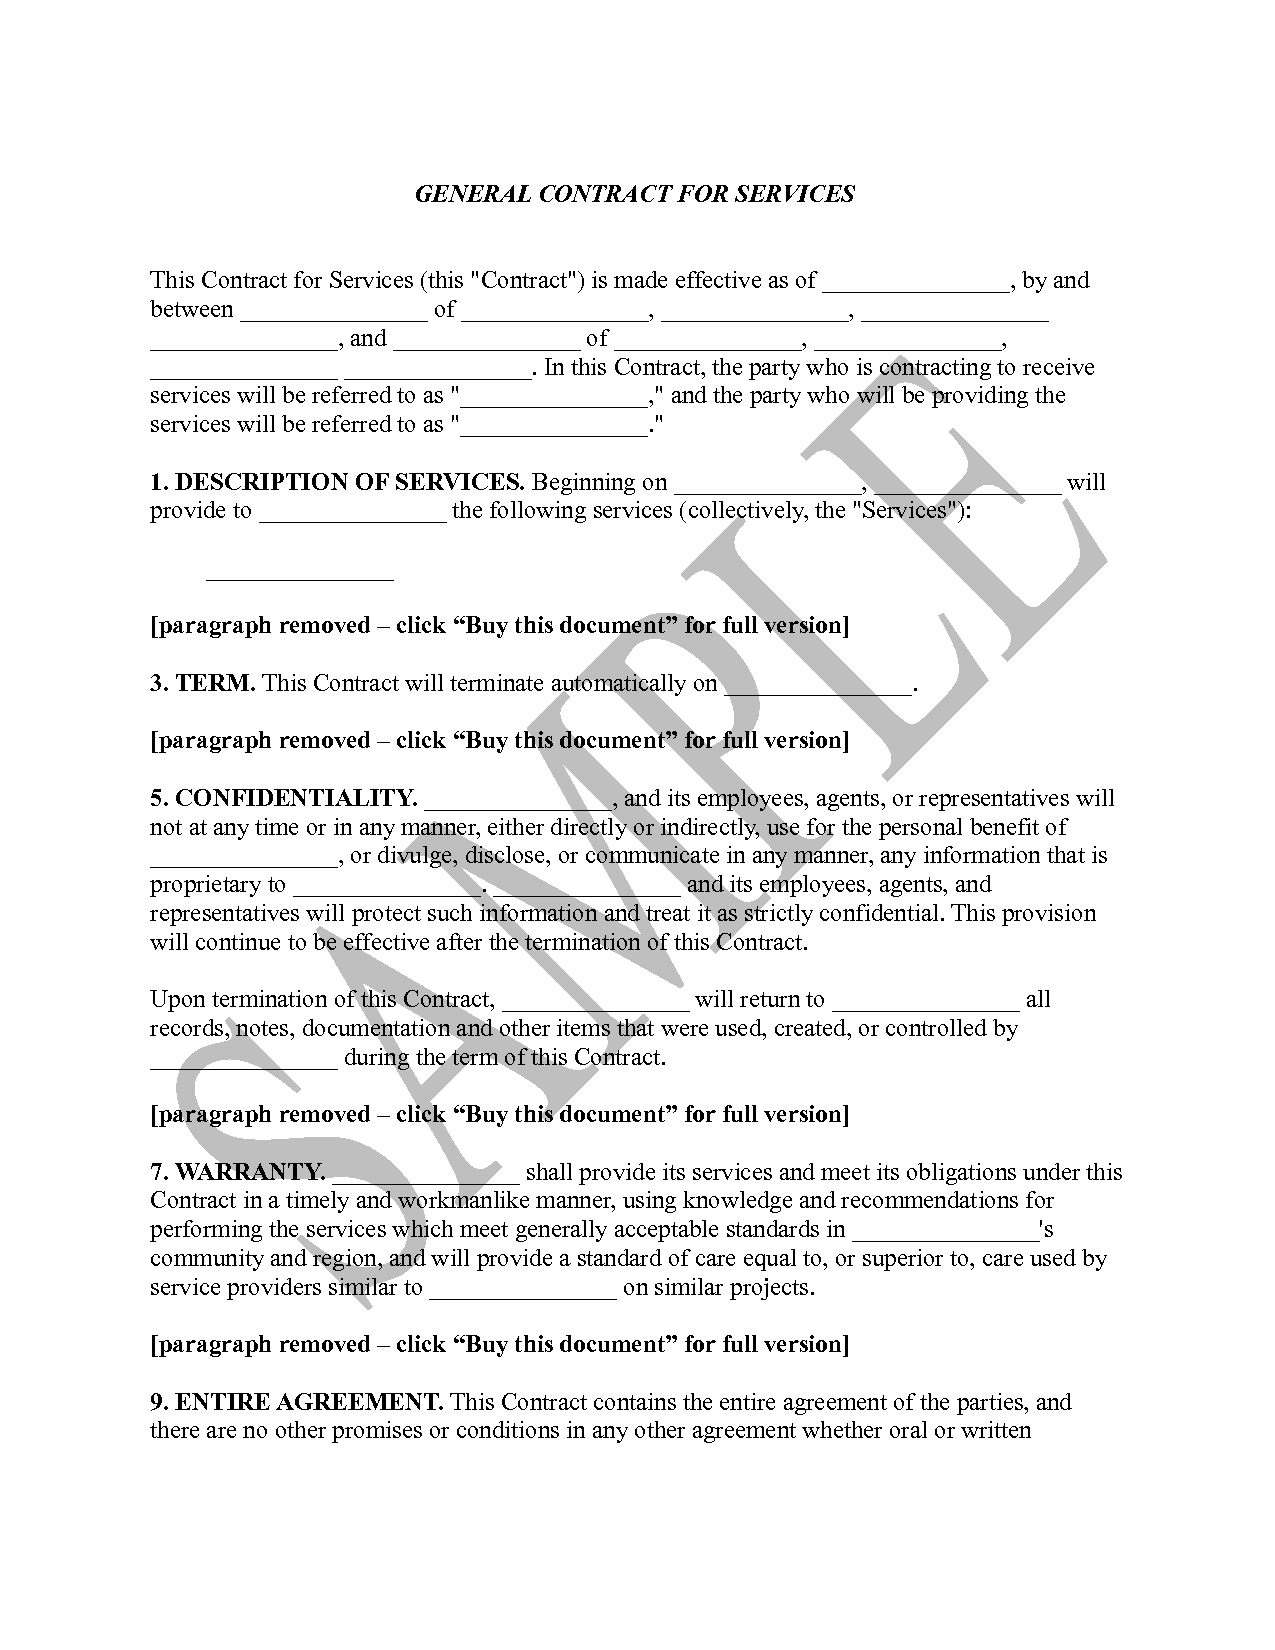 general-contract-for-services-template-free-printable-documents